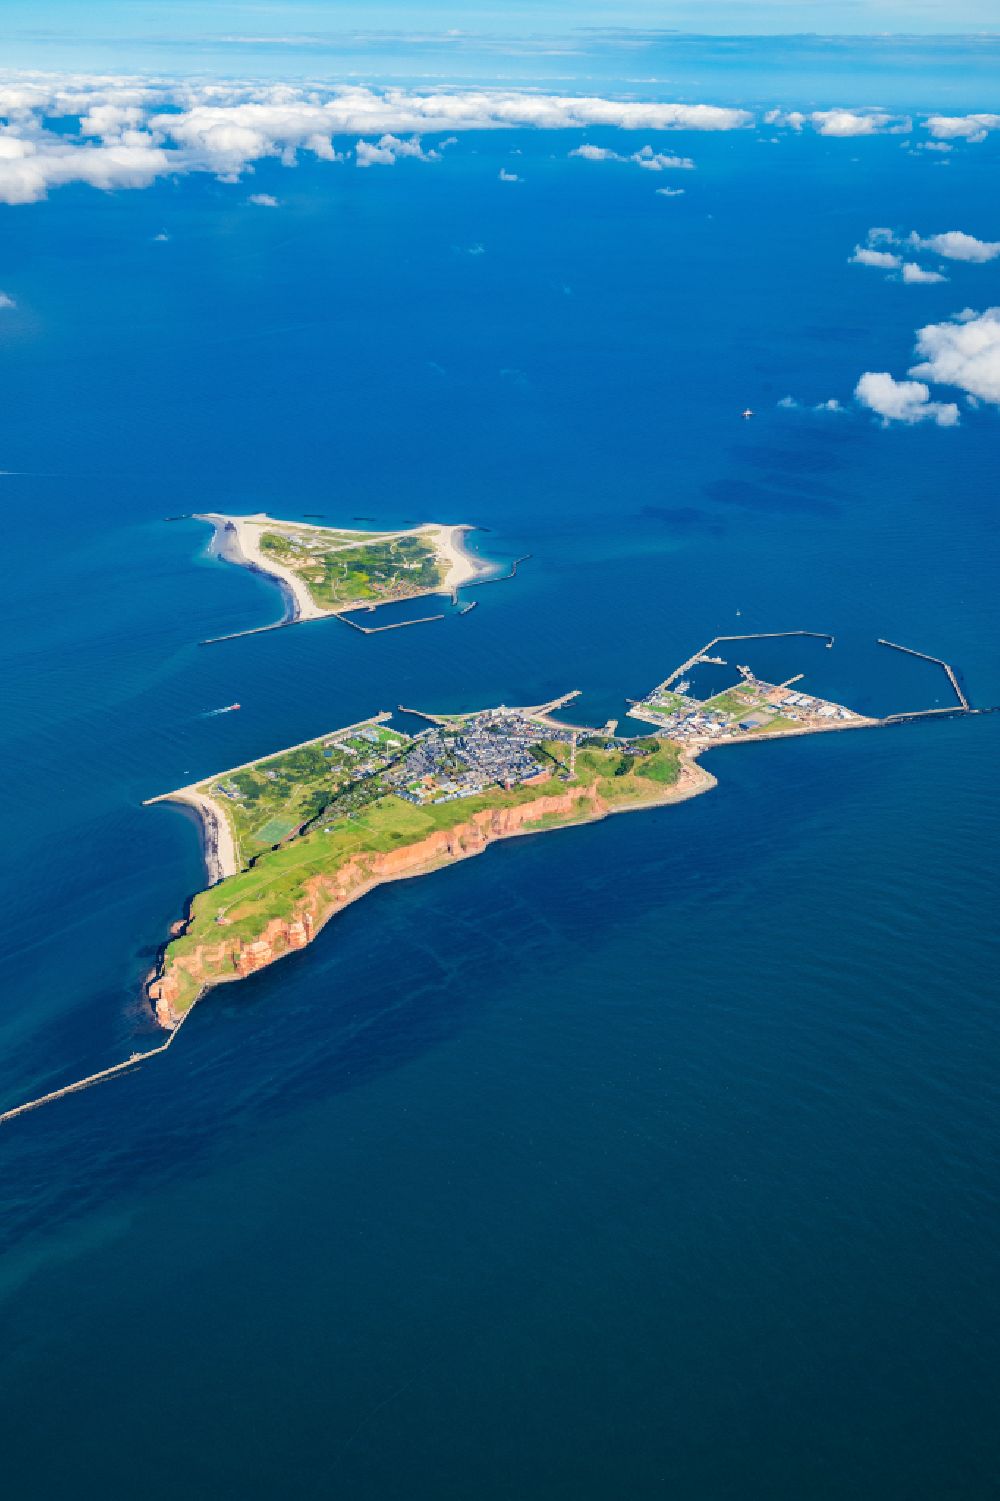 Helgoland from the bird's eye view: Coastal landscape of the island of Helgoland in the North Sea in the state of Schleswig-Holstein, Germany